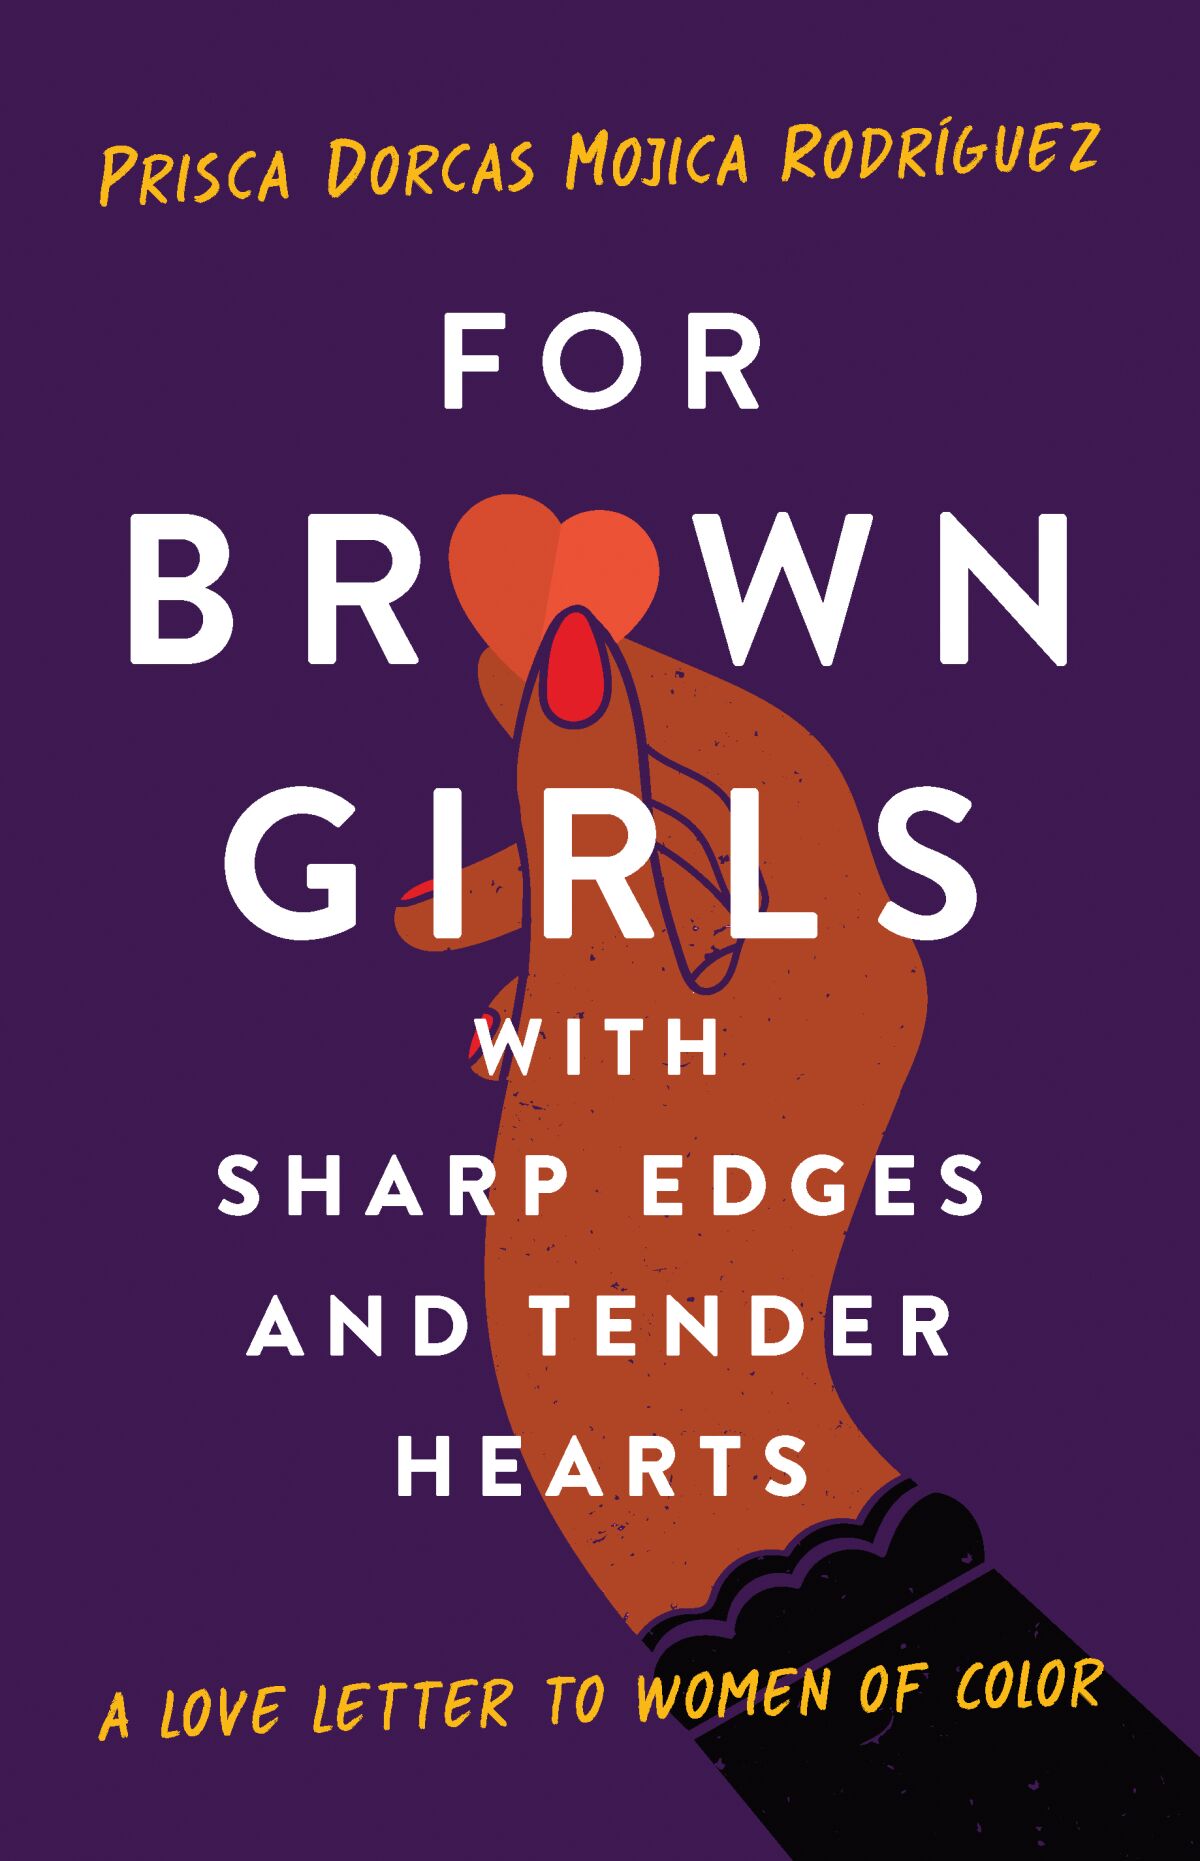 “For Brown Girls With Sharp Edges and Tender Hearts,” by Prisca Dorcas Mojica Rodríguez.